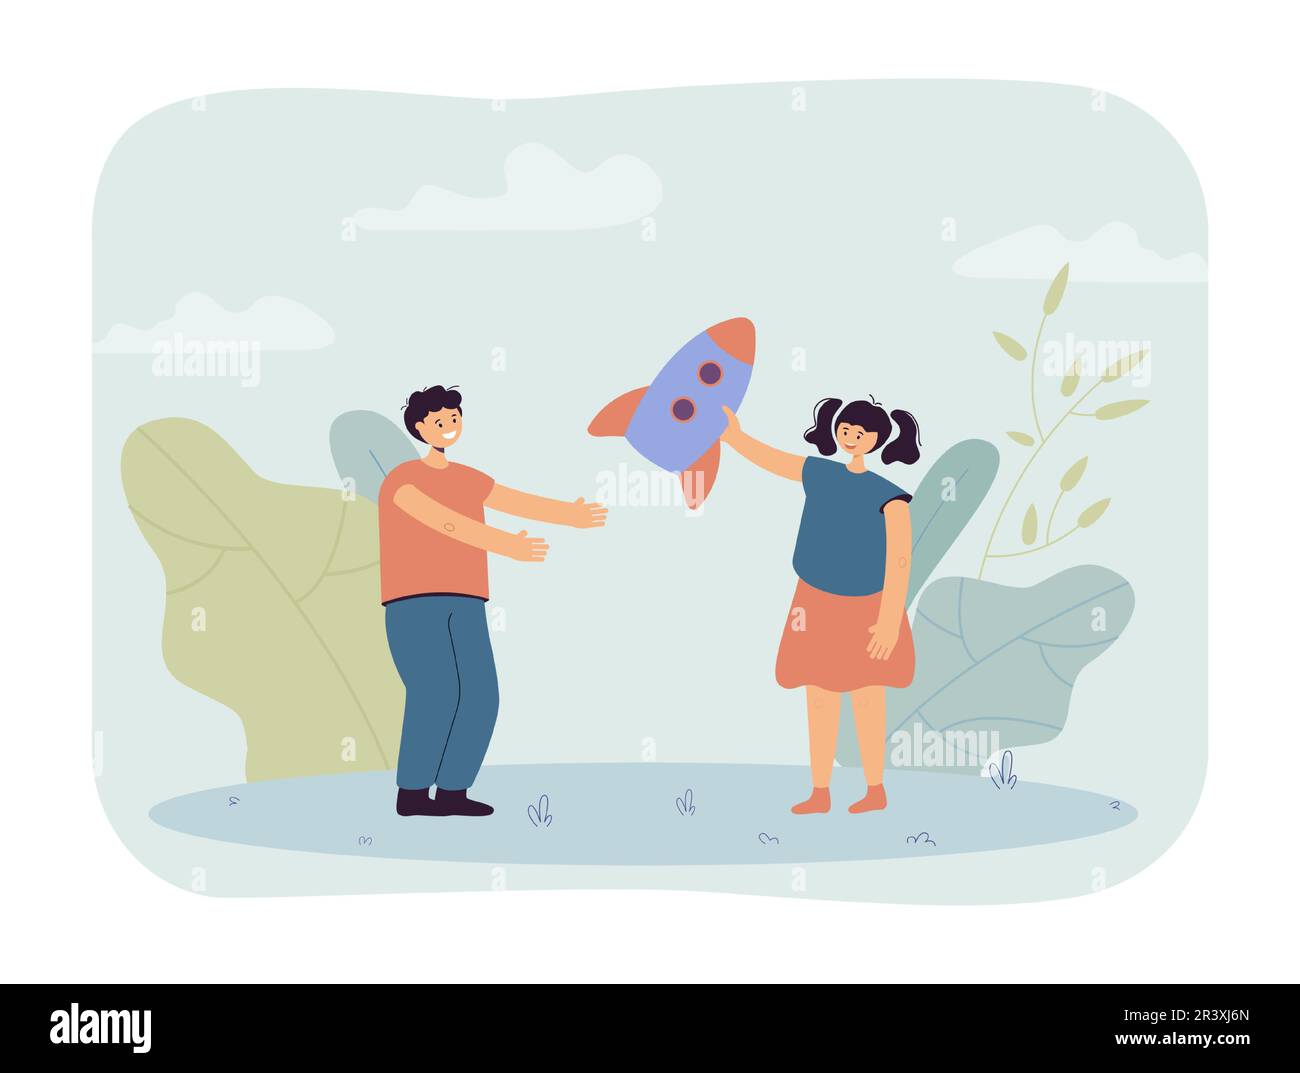 Girl giving toy rocket to friend as present Stock Vector